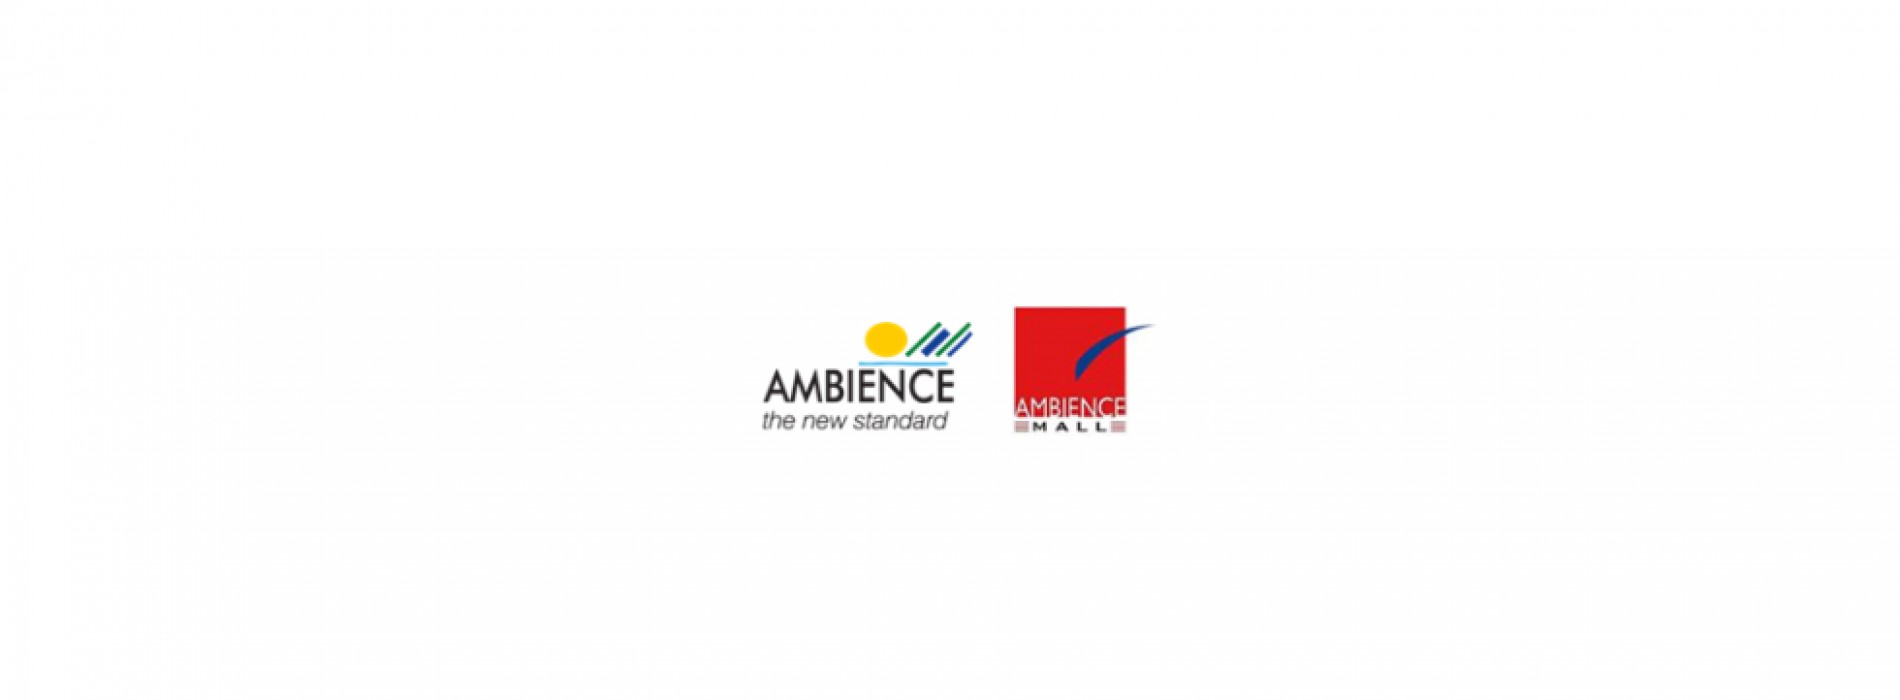 Ambience embarks on a month long campaign to celebrate a decade of success